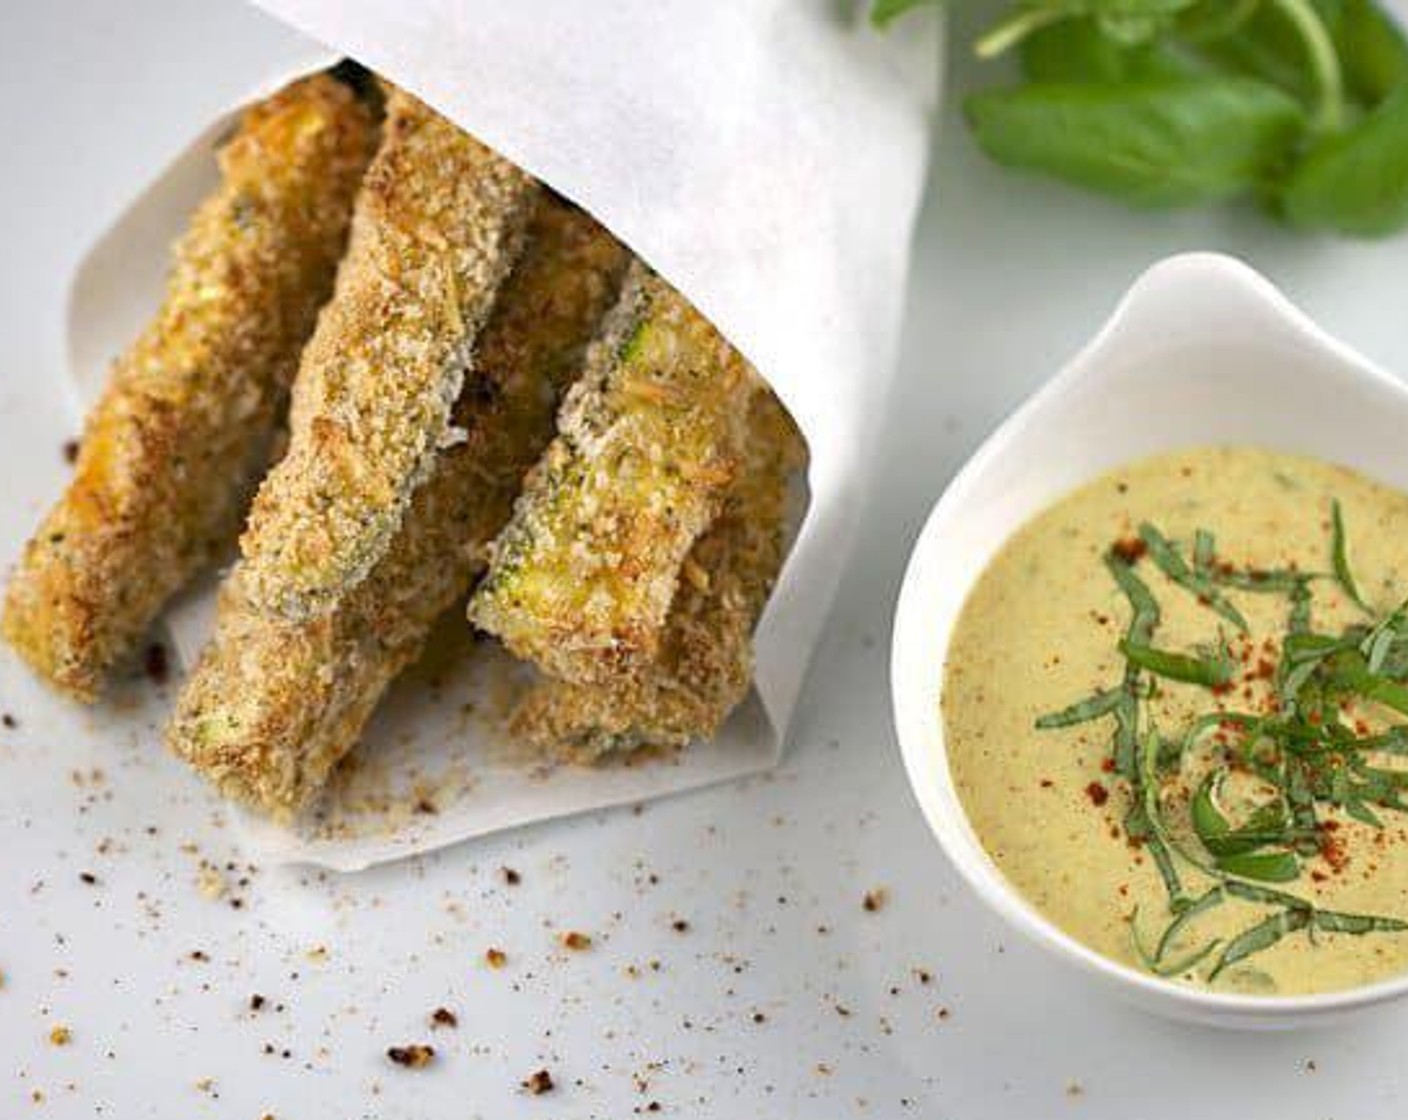 Baked Zucchini Parmesan Fries with Mustard Dip